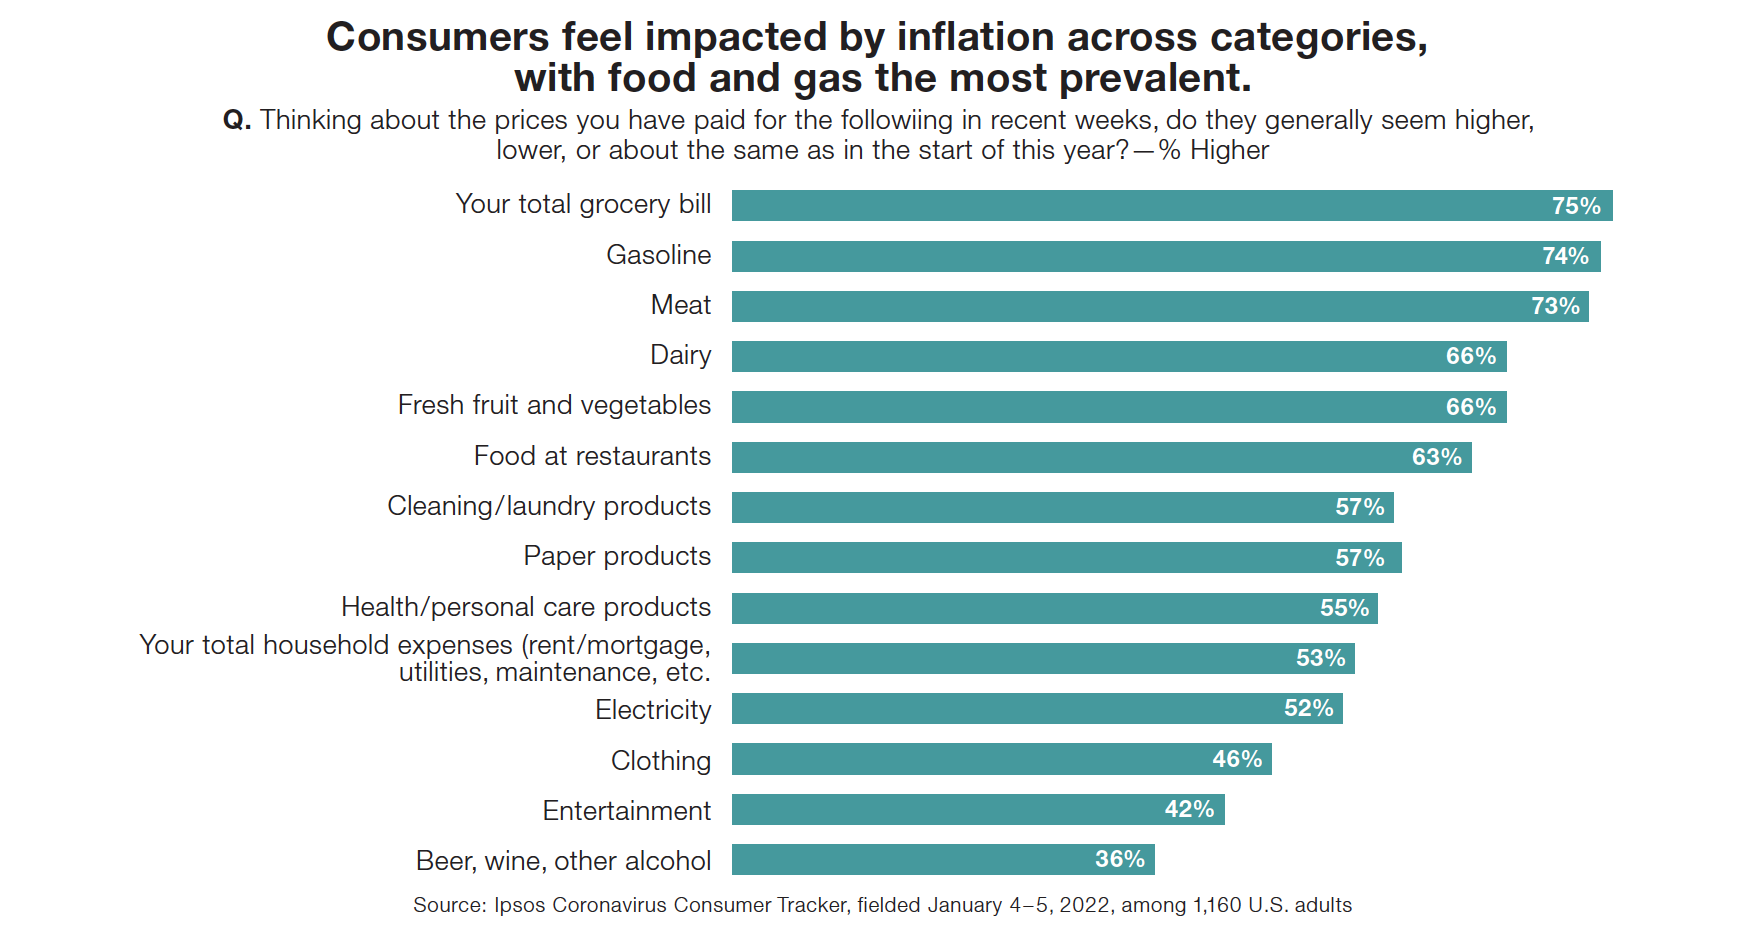 Consumers feel impacted by inflation across categories, with food and gas the most prevalent.